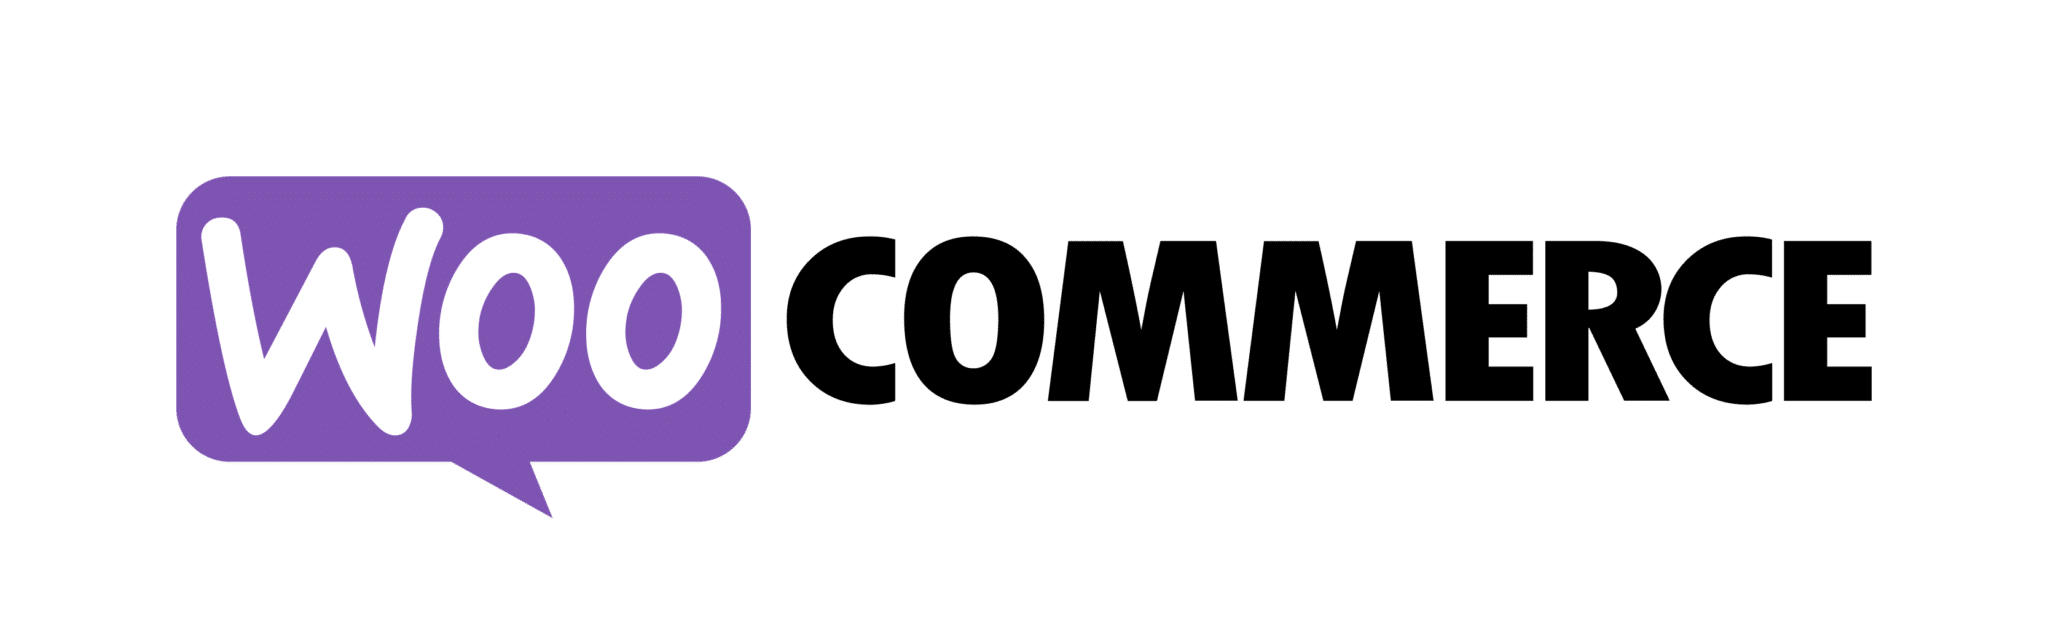 WooCommerce Logo - Your online store with WooCommerce